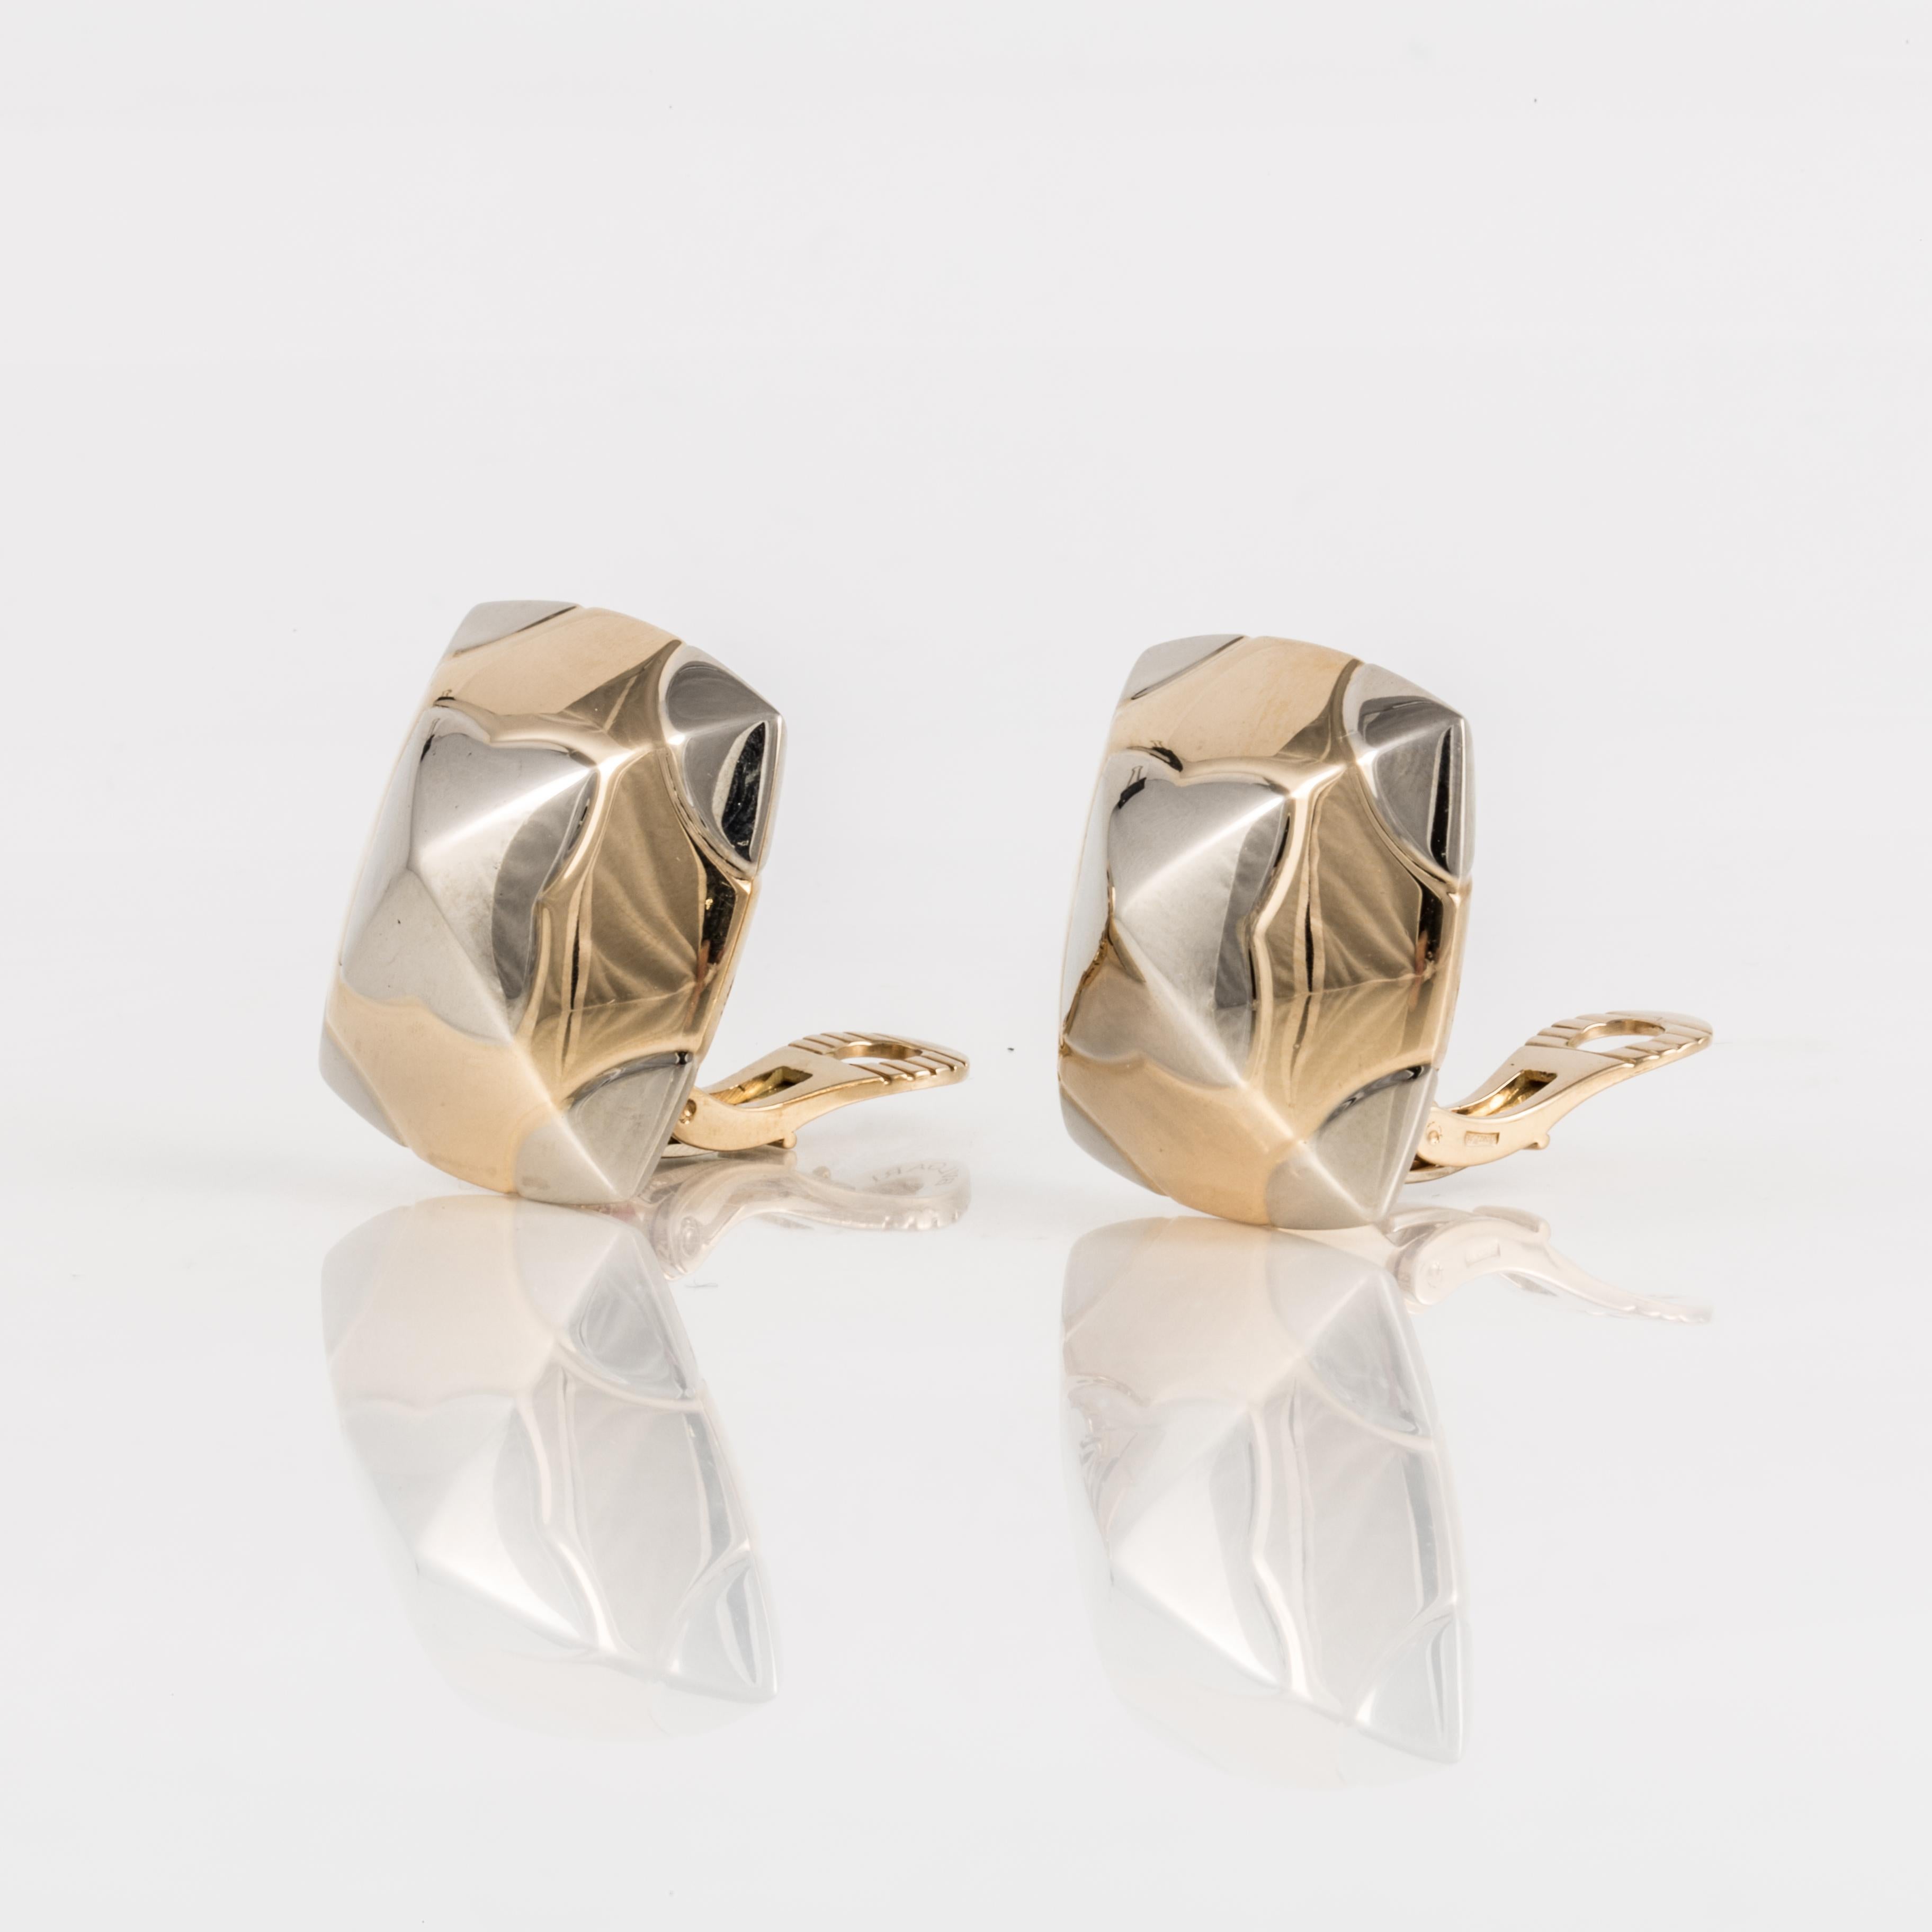 Bulgari Pyramide earrings in 18K yellow and white gold.  They measure 1 inch across and are a clip style.